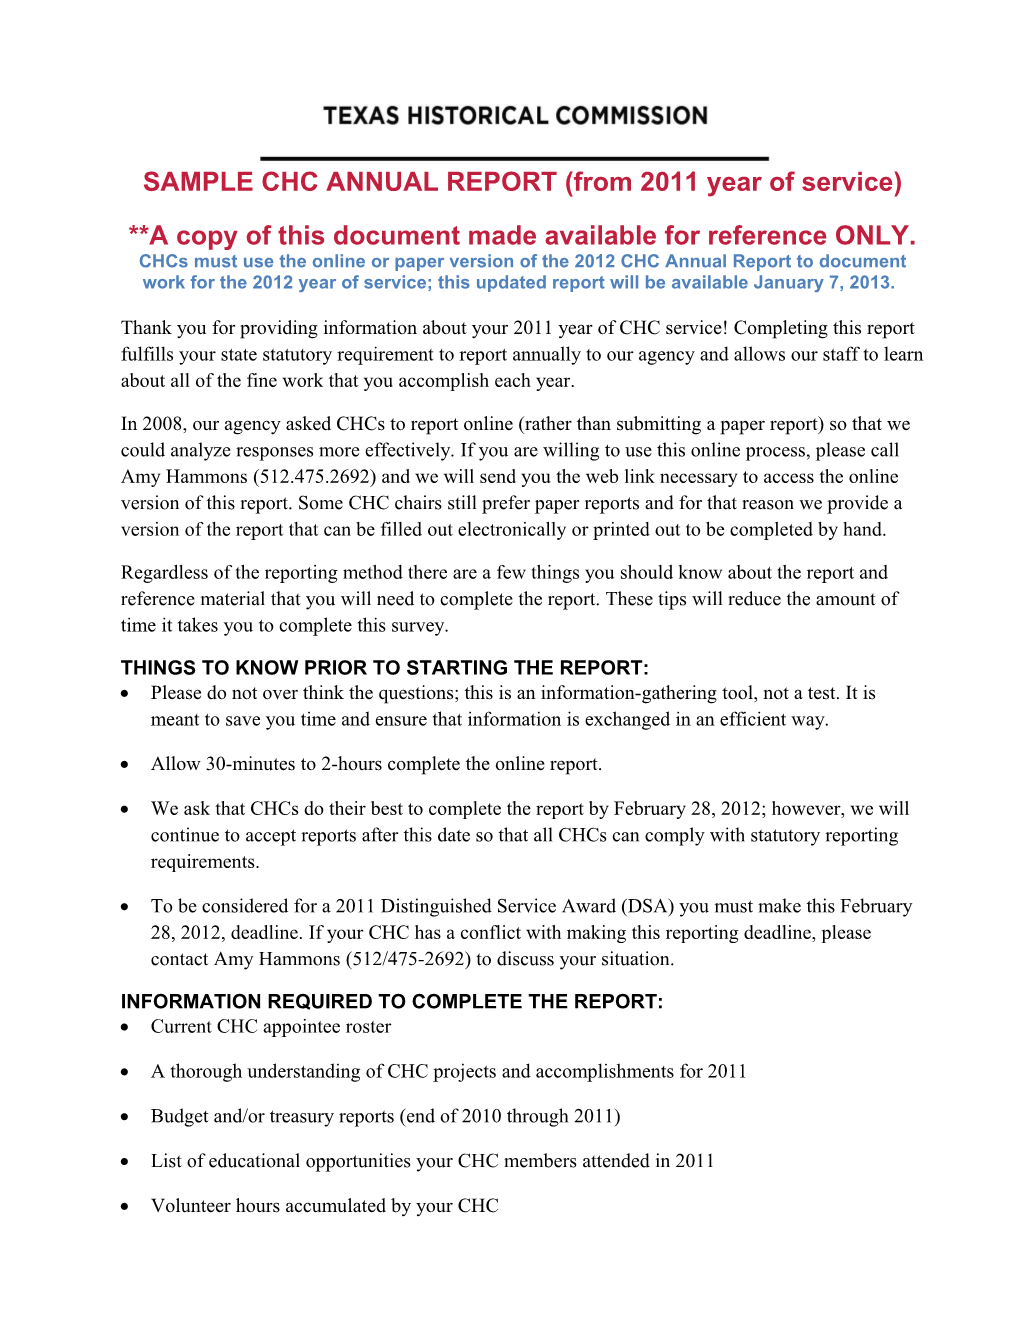 SAMPLE CHC ANNUAL REPORT (From 2011 Year of Service)